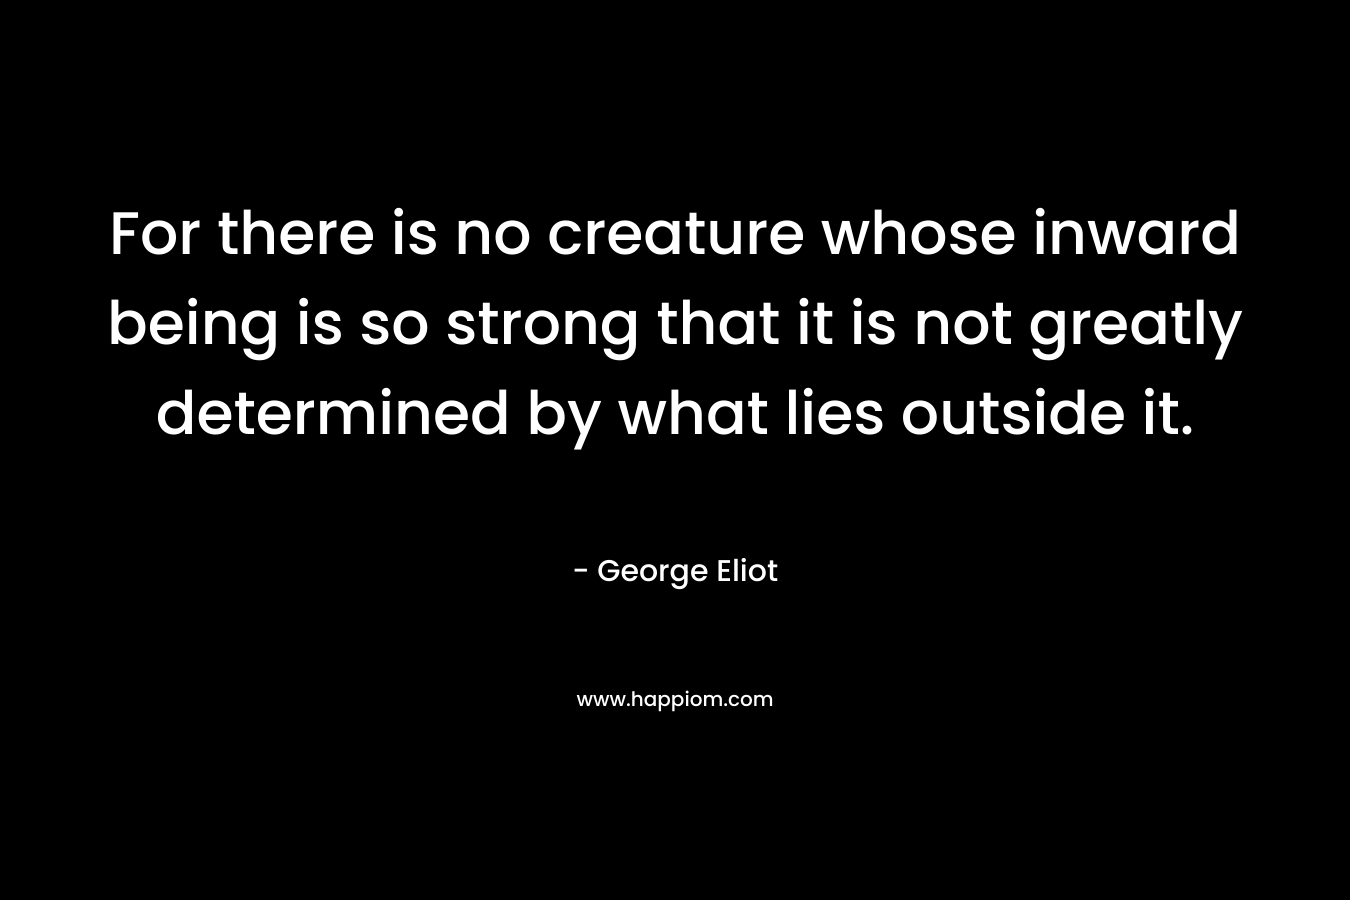 For there is no creature whose inward being is so strong that it is not greatly determined by what lies outside it. – George Eliot